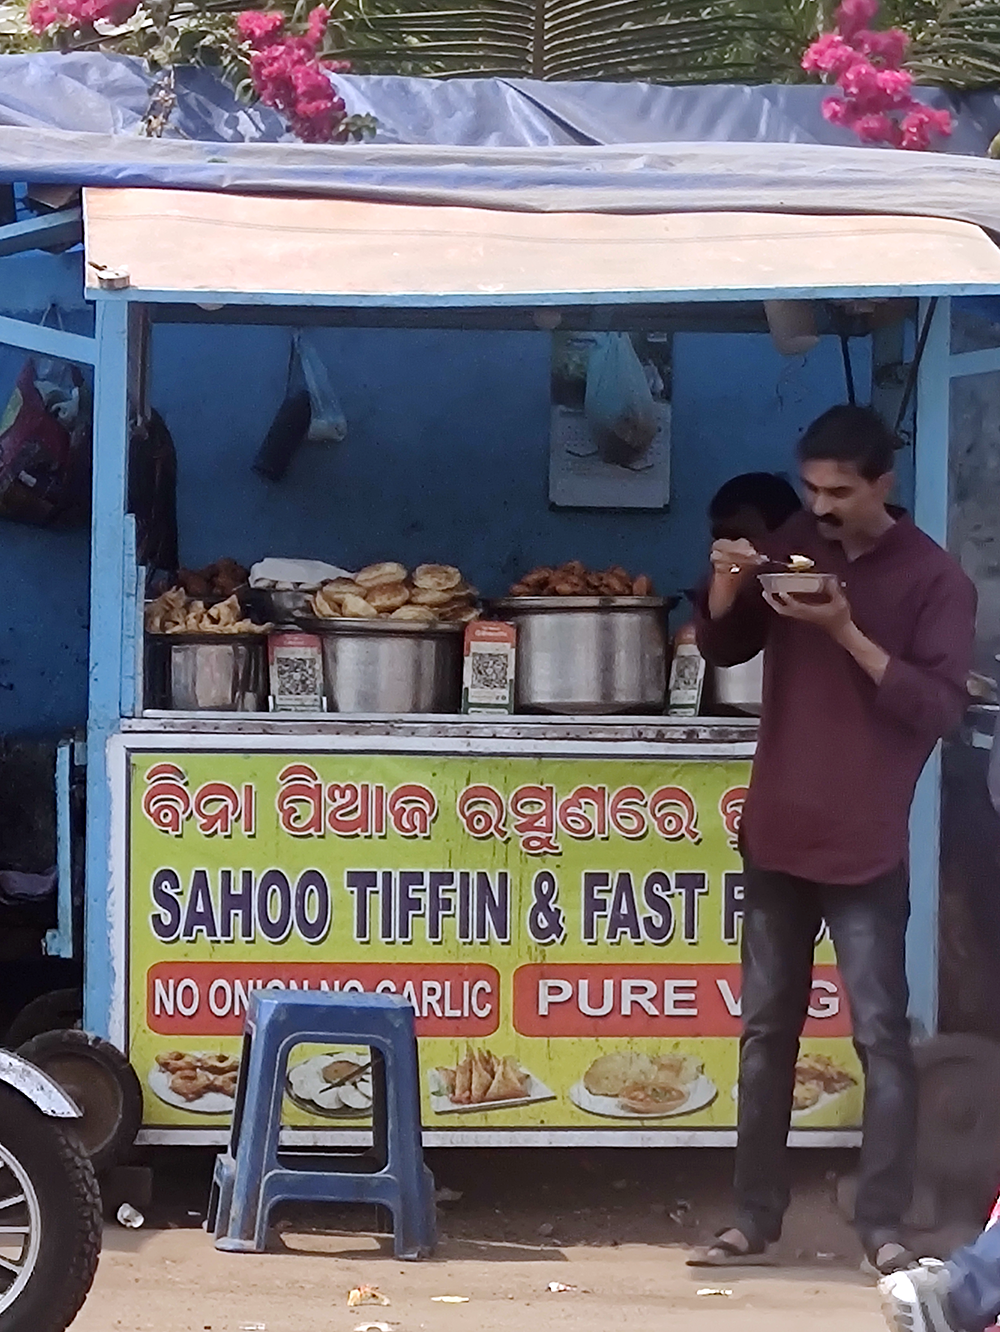 A man eats in front of a food cart that has QR codes for digital payment